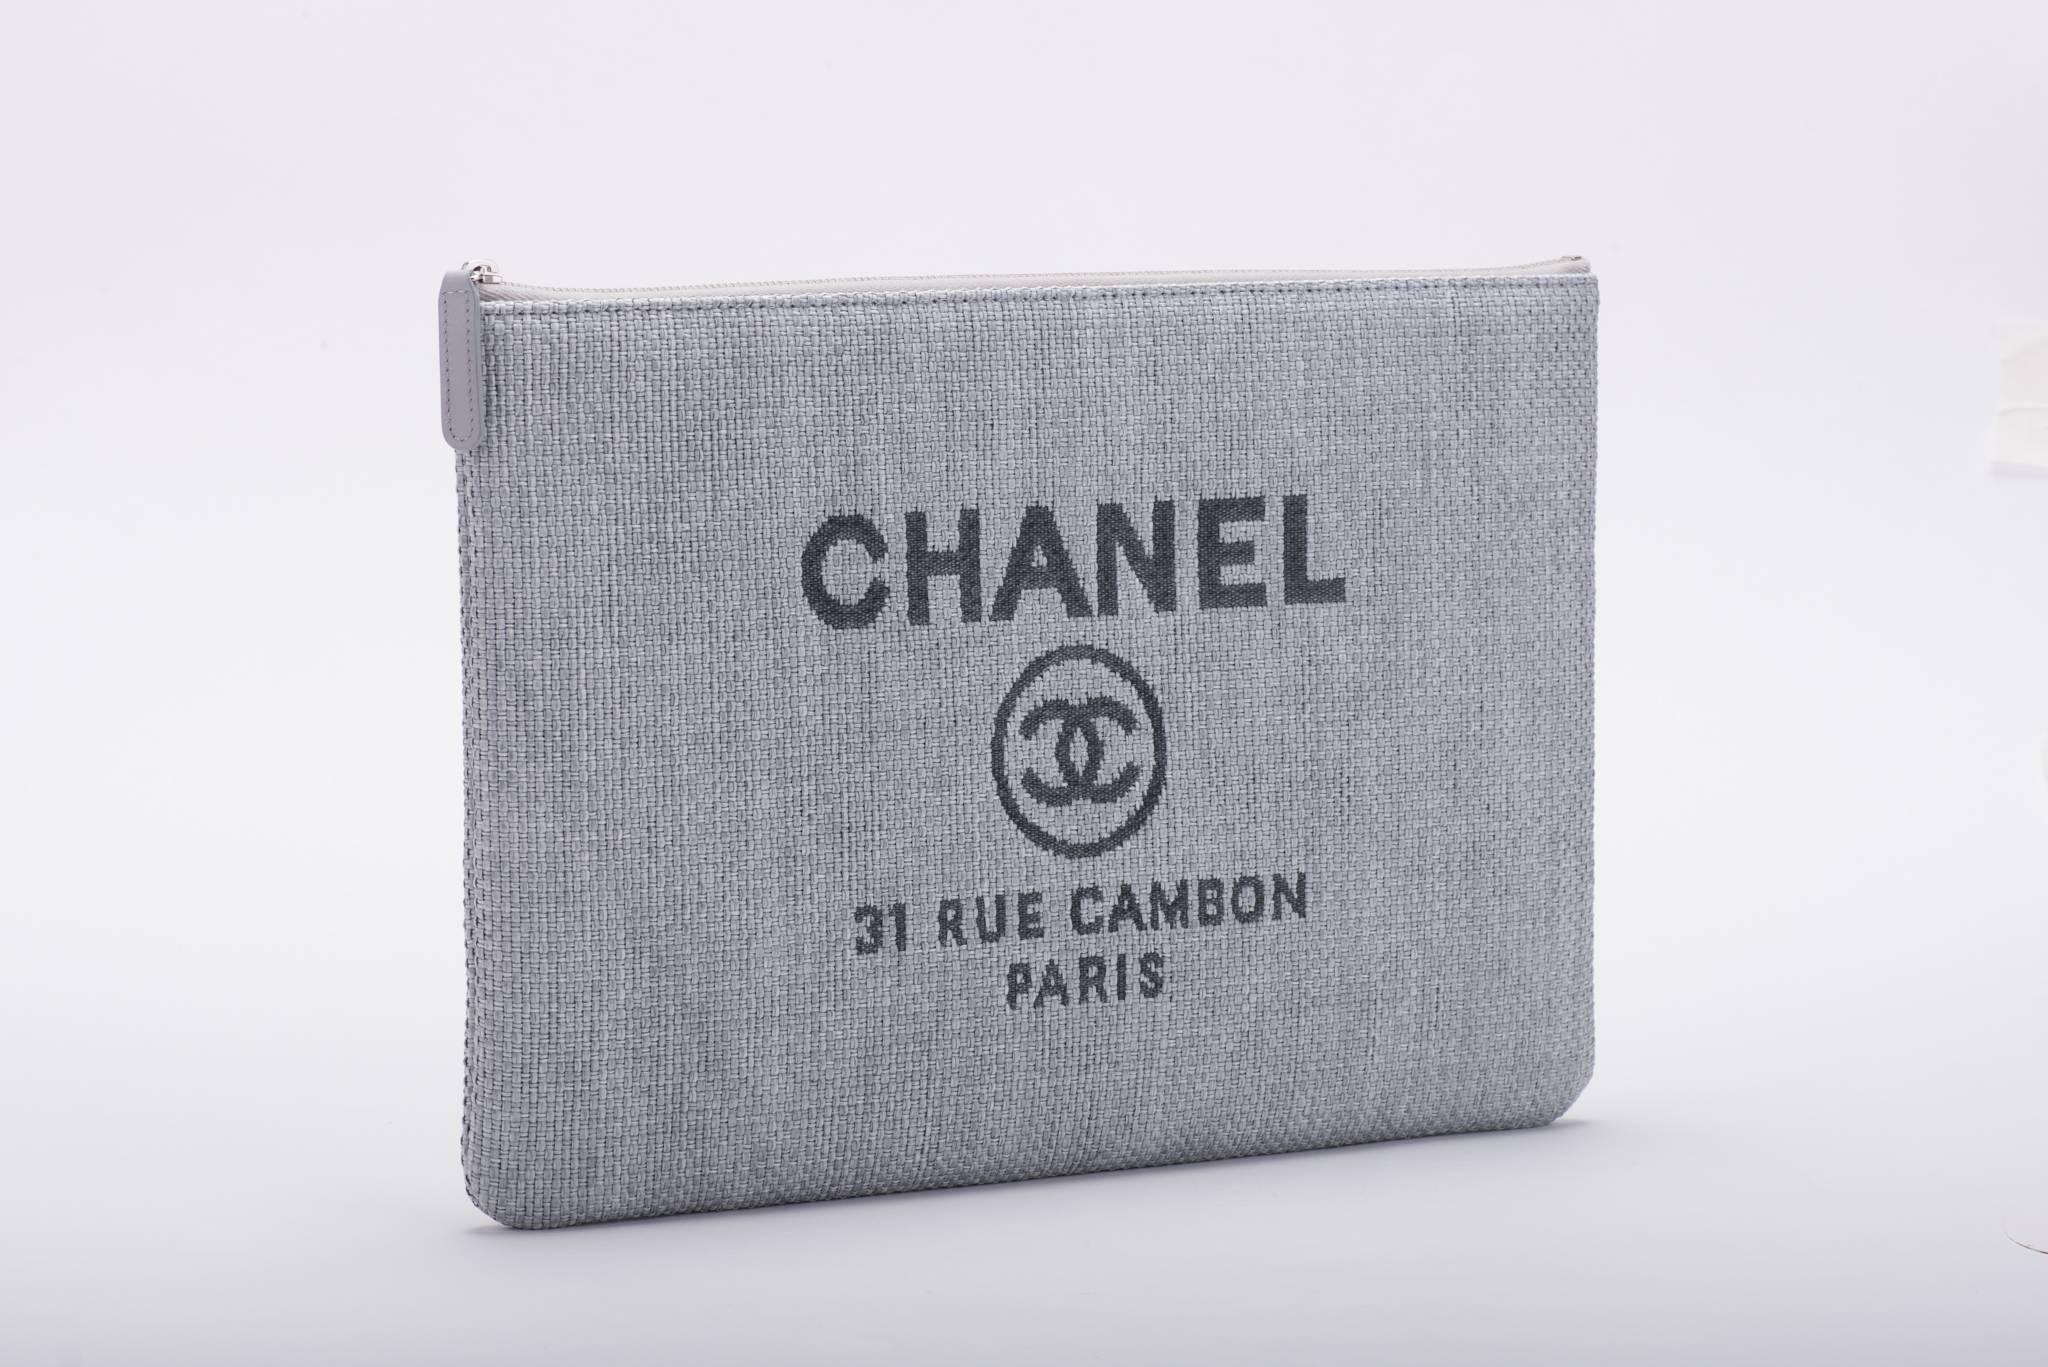 Chanel brand new in box blue linen clutch. Signature logo and Cambon store address. Comes with hologram, ID card, booklet, box and ribbon.